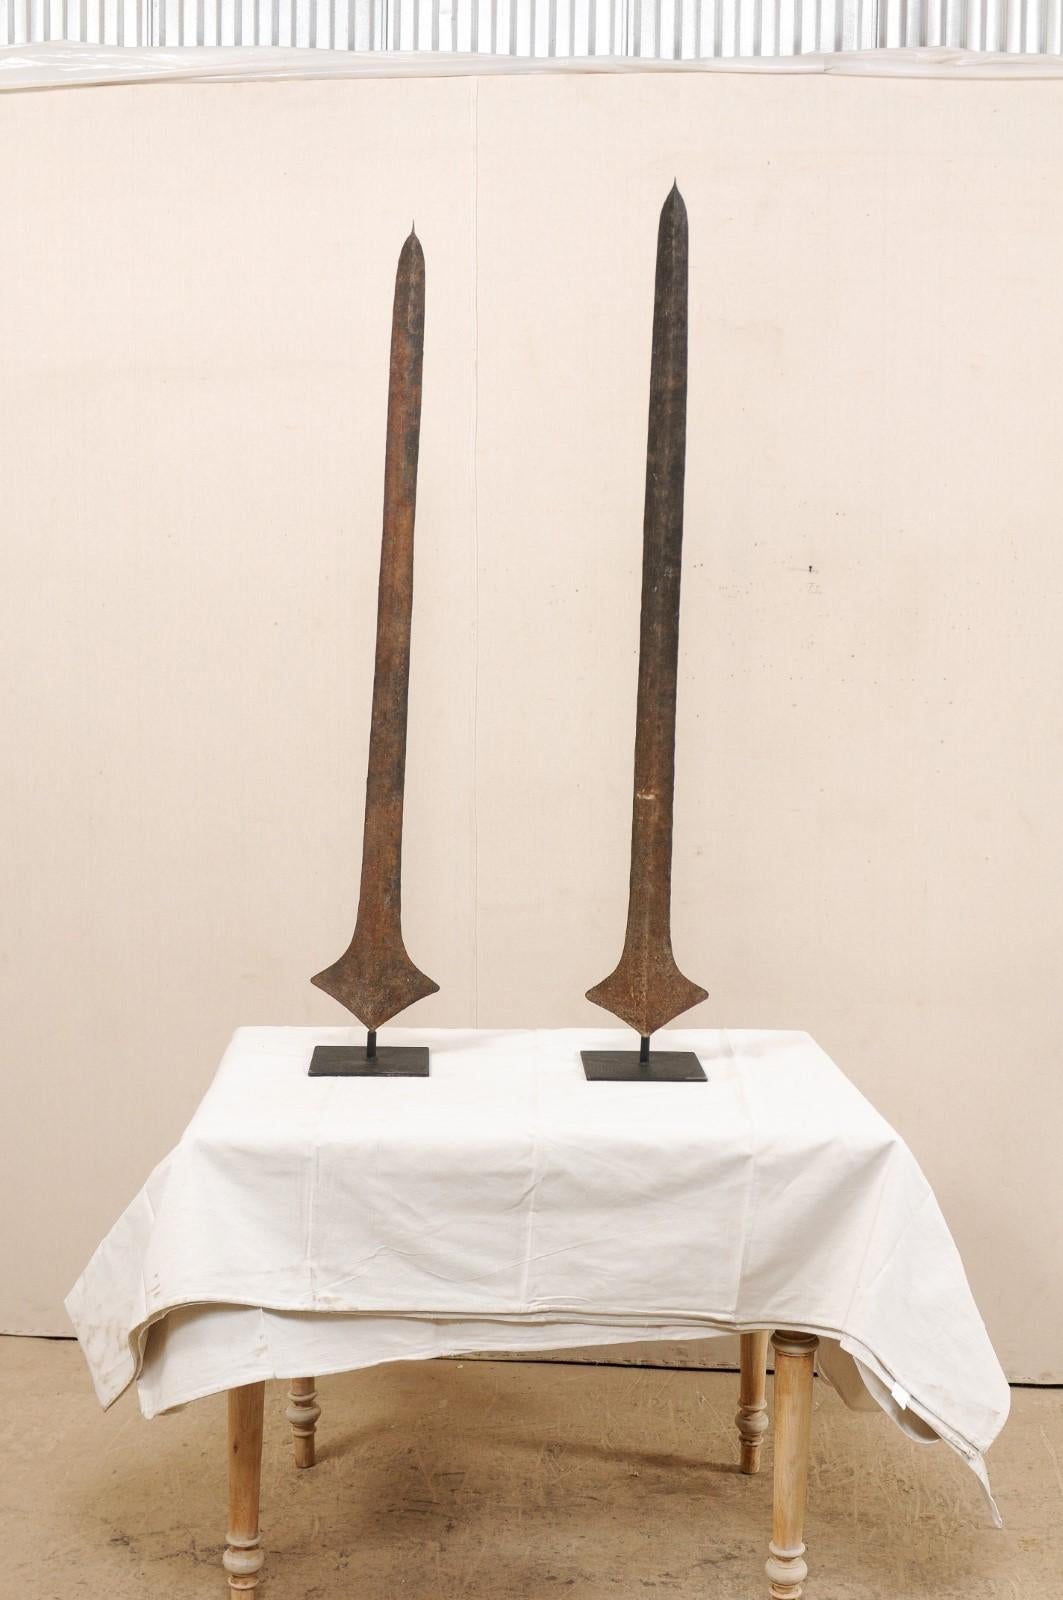 This is a pair of African iron currency blade or sword currency from the Nkutshu, Topoke & Songo Meno peoples, Democratic Republic of Congo (Zaire) which are nicely presented upon custom metal stands. Such blades were used by various tribal groups